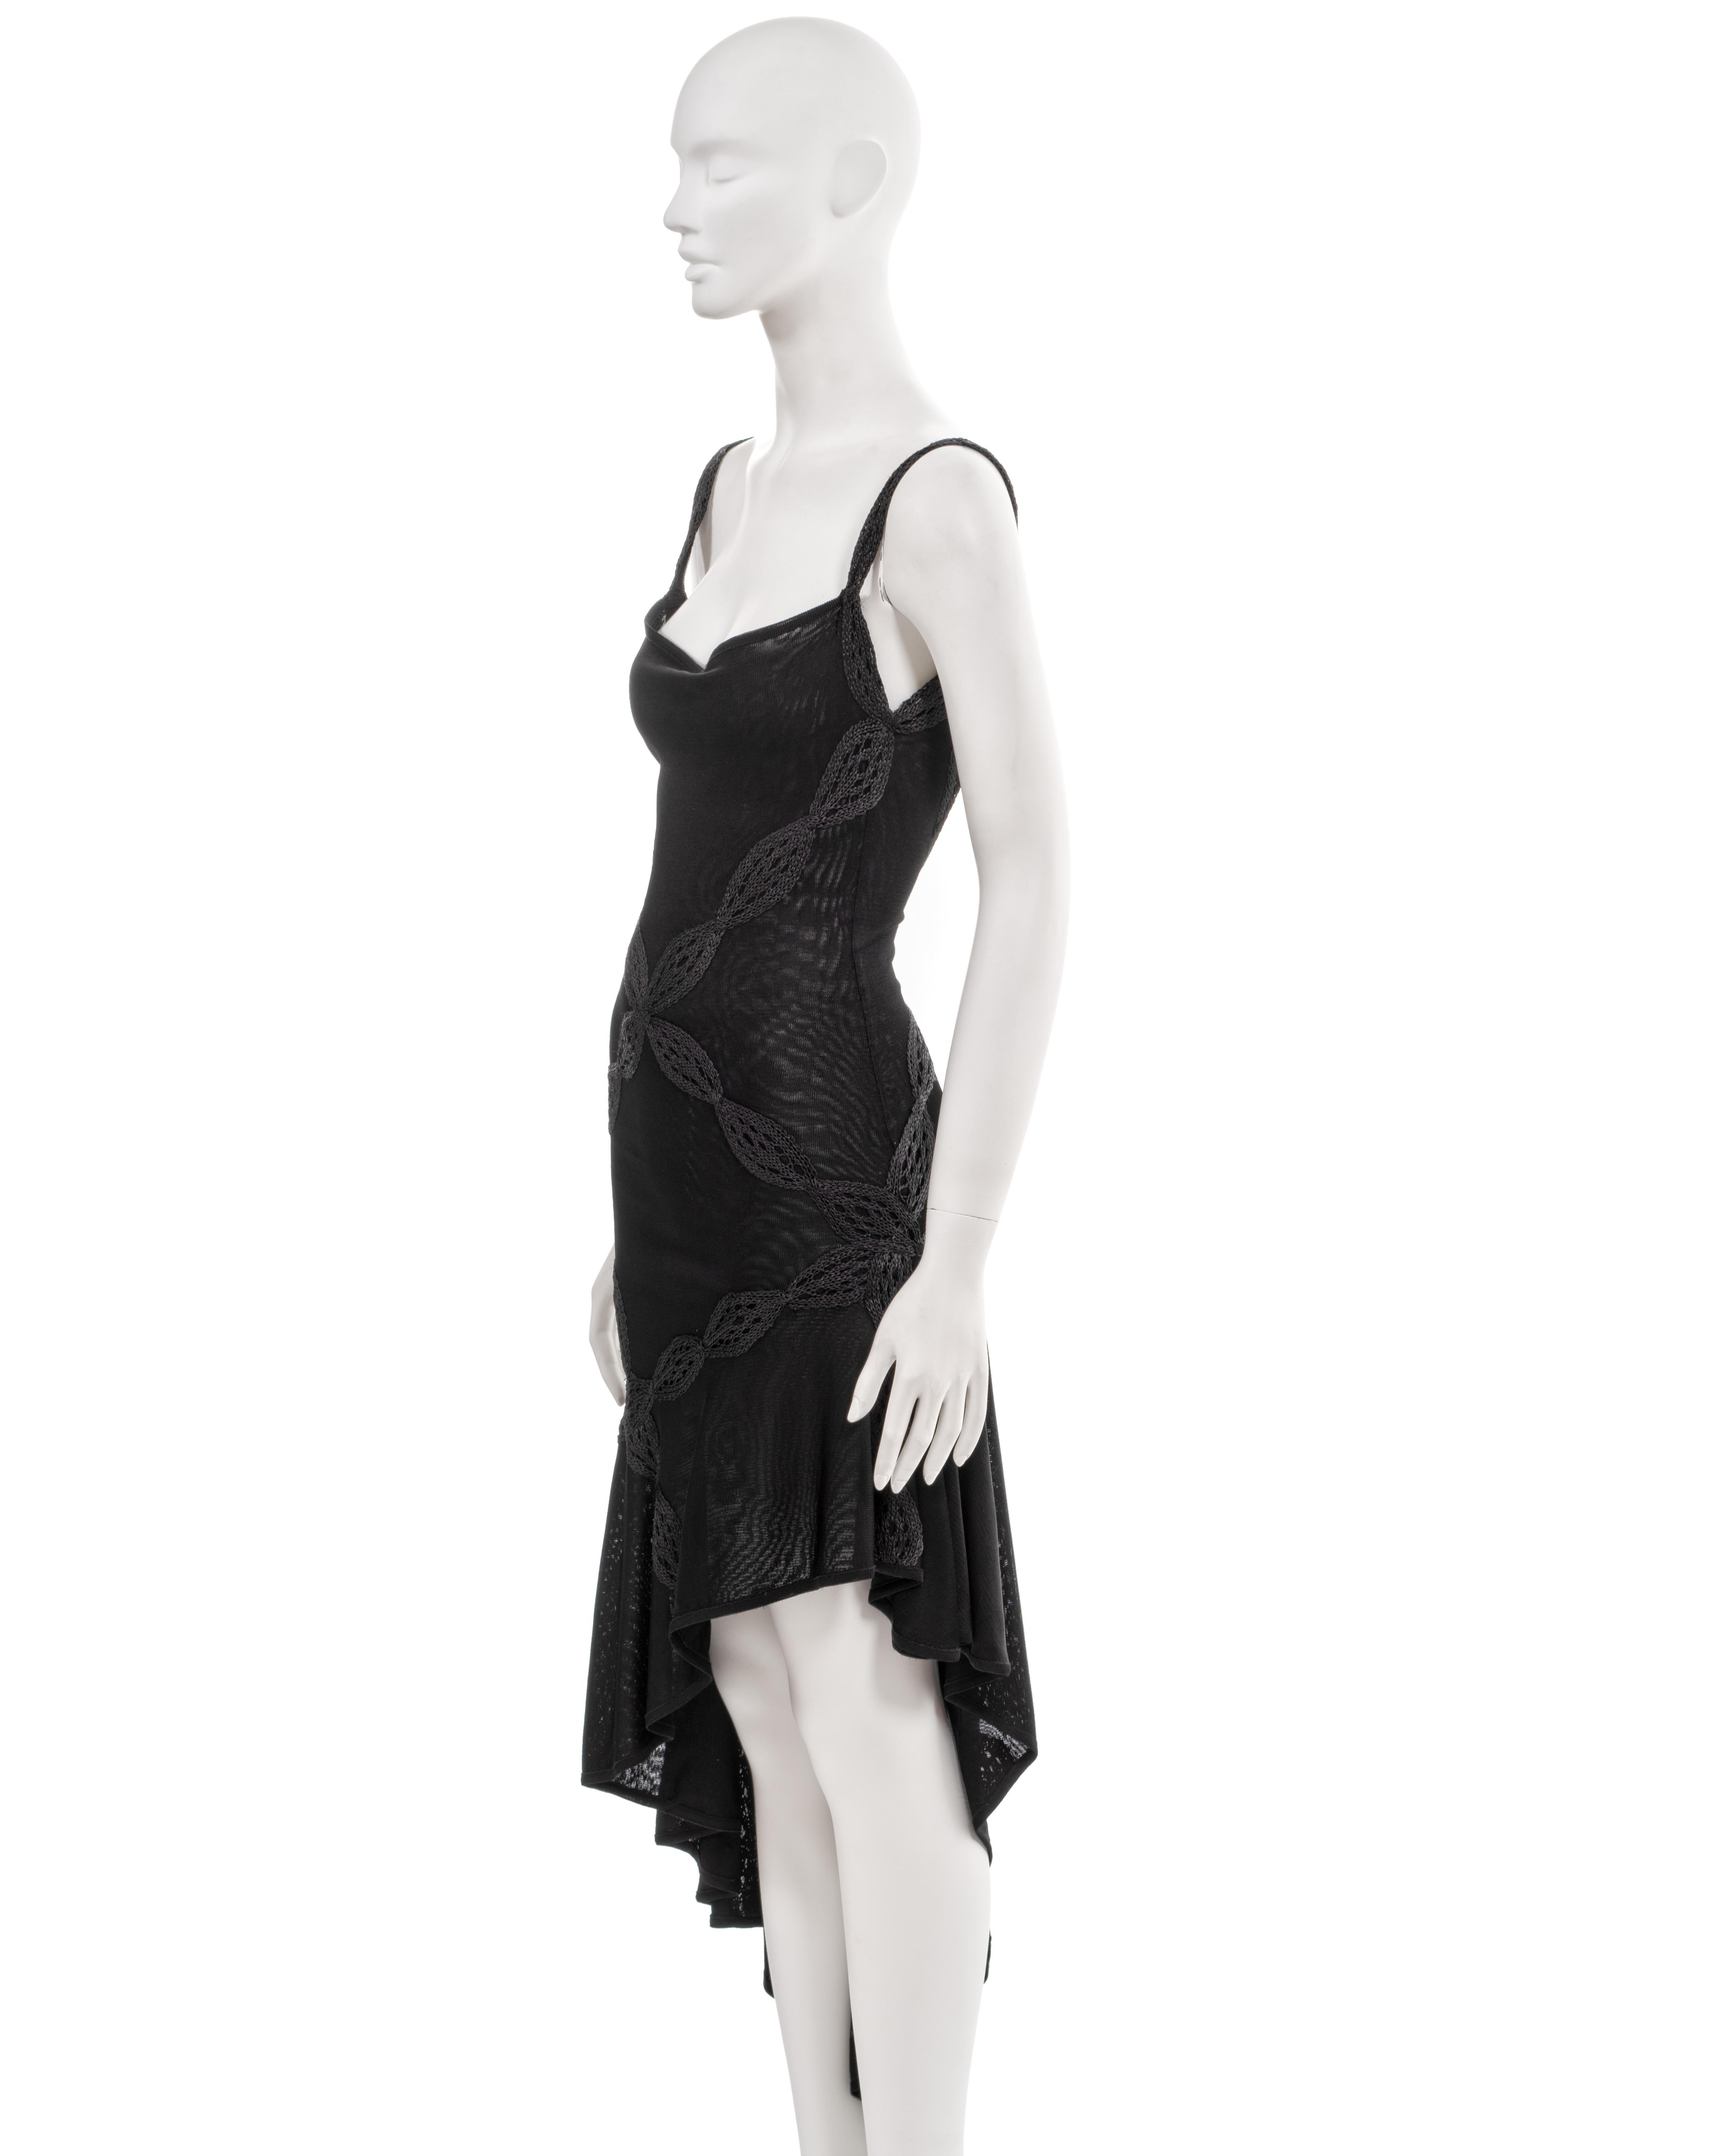 Christian Dior by John Galliano black embroidered knit evening dress, ss 2001 For Sale 7